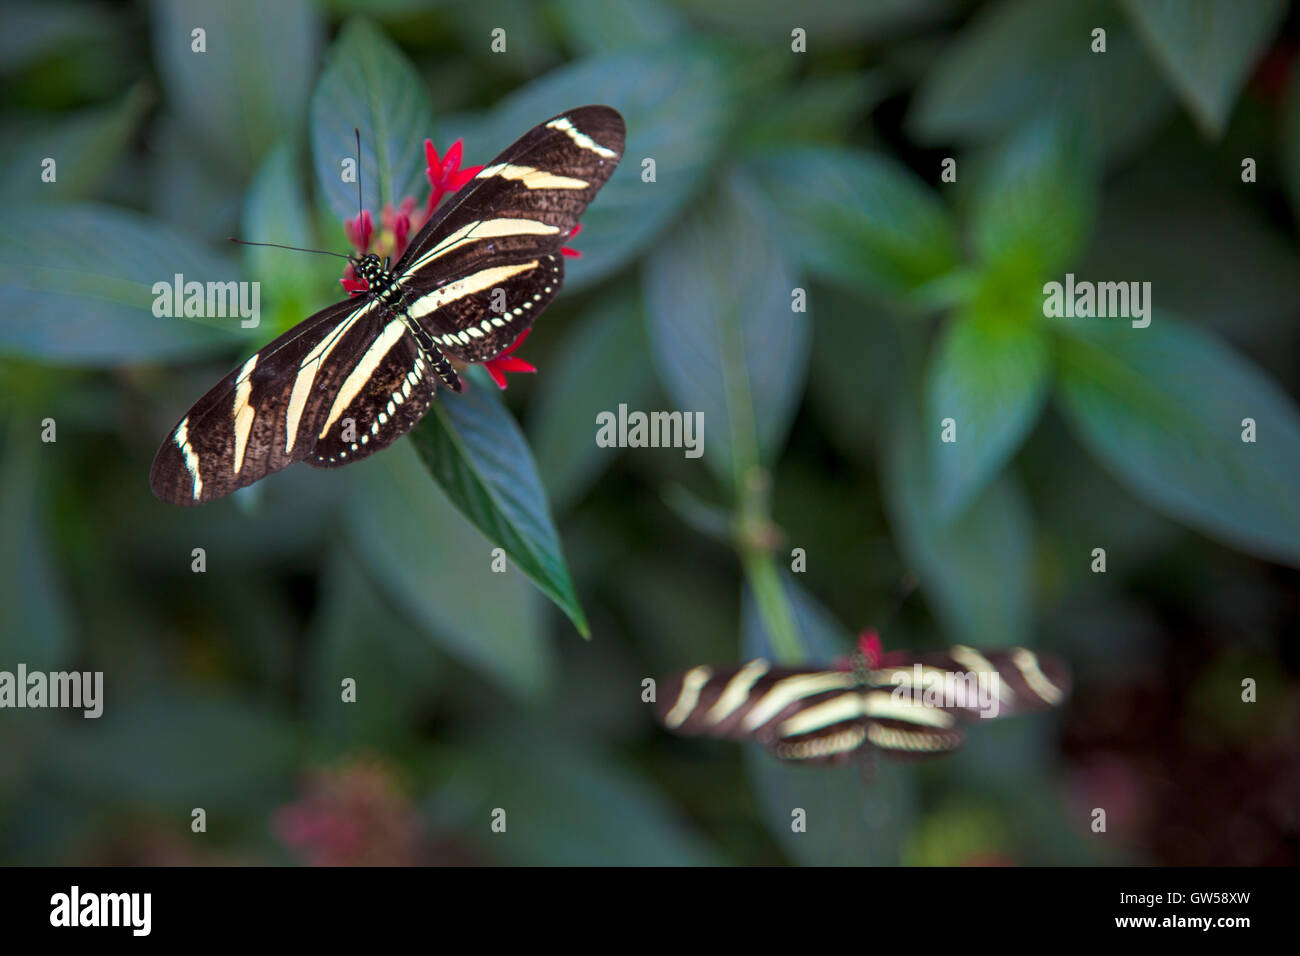 Two Zebra longwing (Helicons charitonia) butterflies pollinating flowers Stock Photo